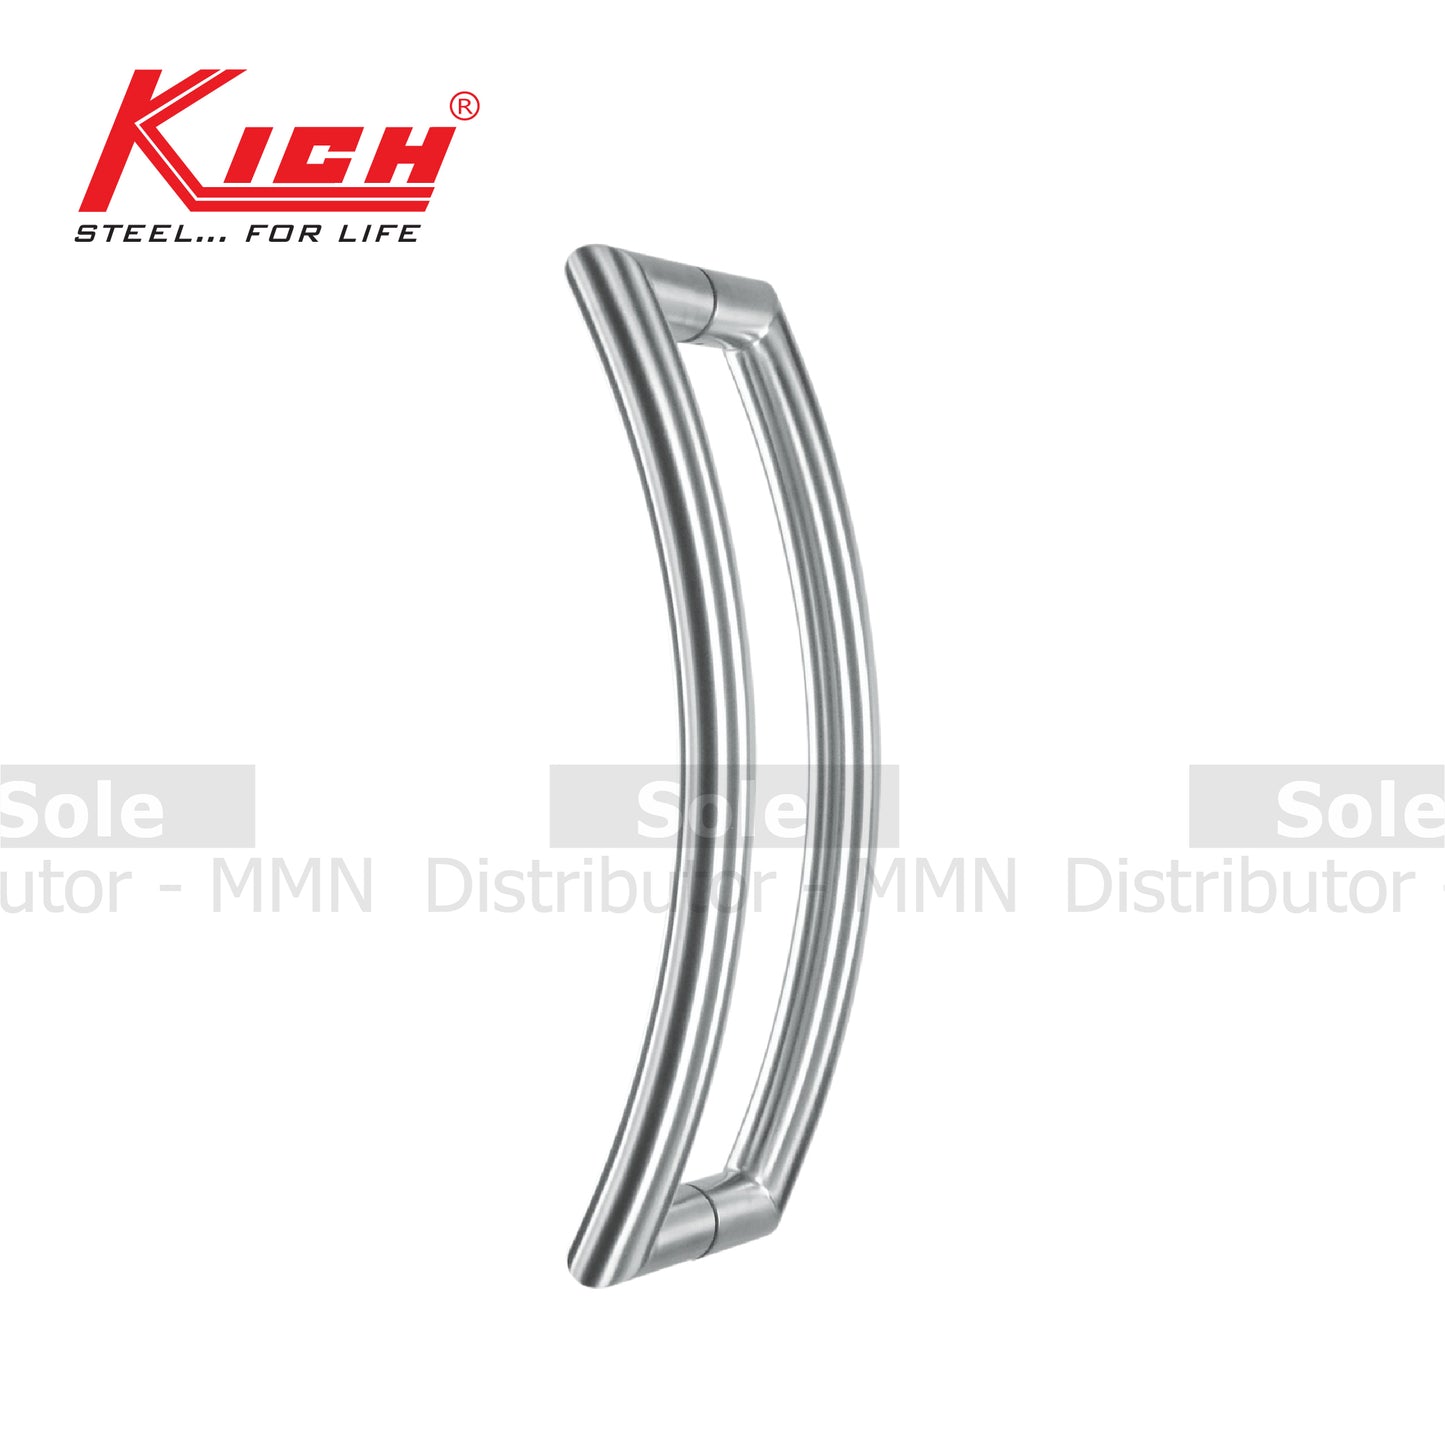 Kich Tube Main Door Pull Handle, Size 12 Inches (300mm) , 316 Stainless Steel (Pair) -KLDHB2212S